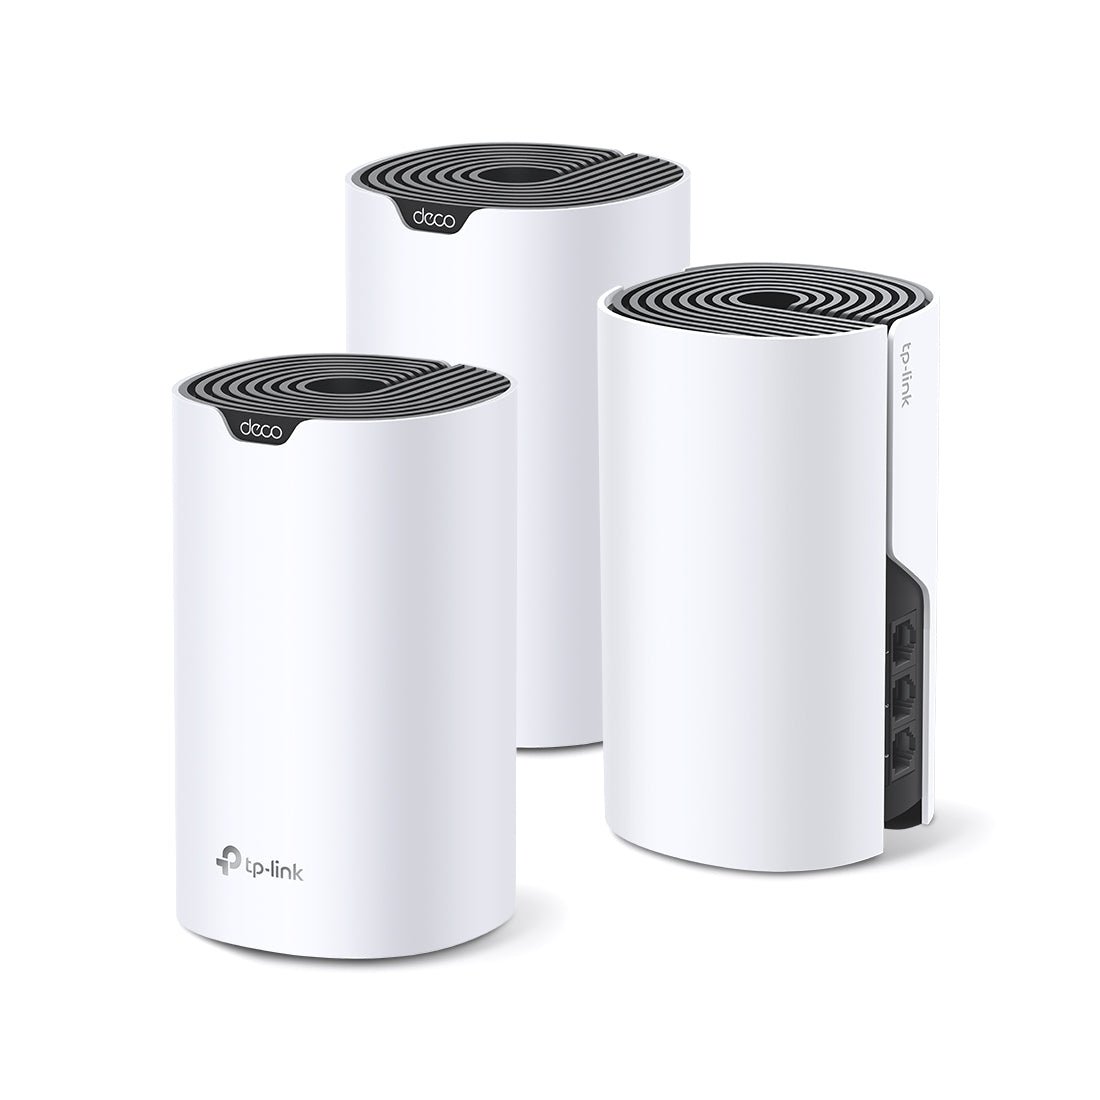 TP-Link Deco S7 AC1900 Whole Home Mesh Wi-Fi System - 3 Pack - راوتر - Store 974 | ستور ٩٧٤